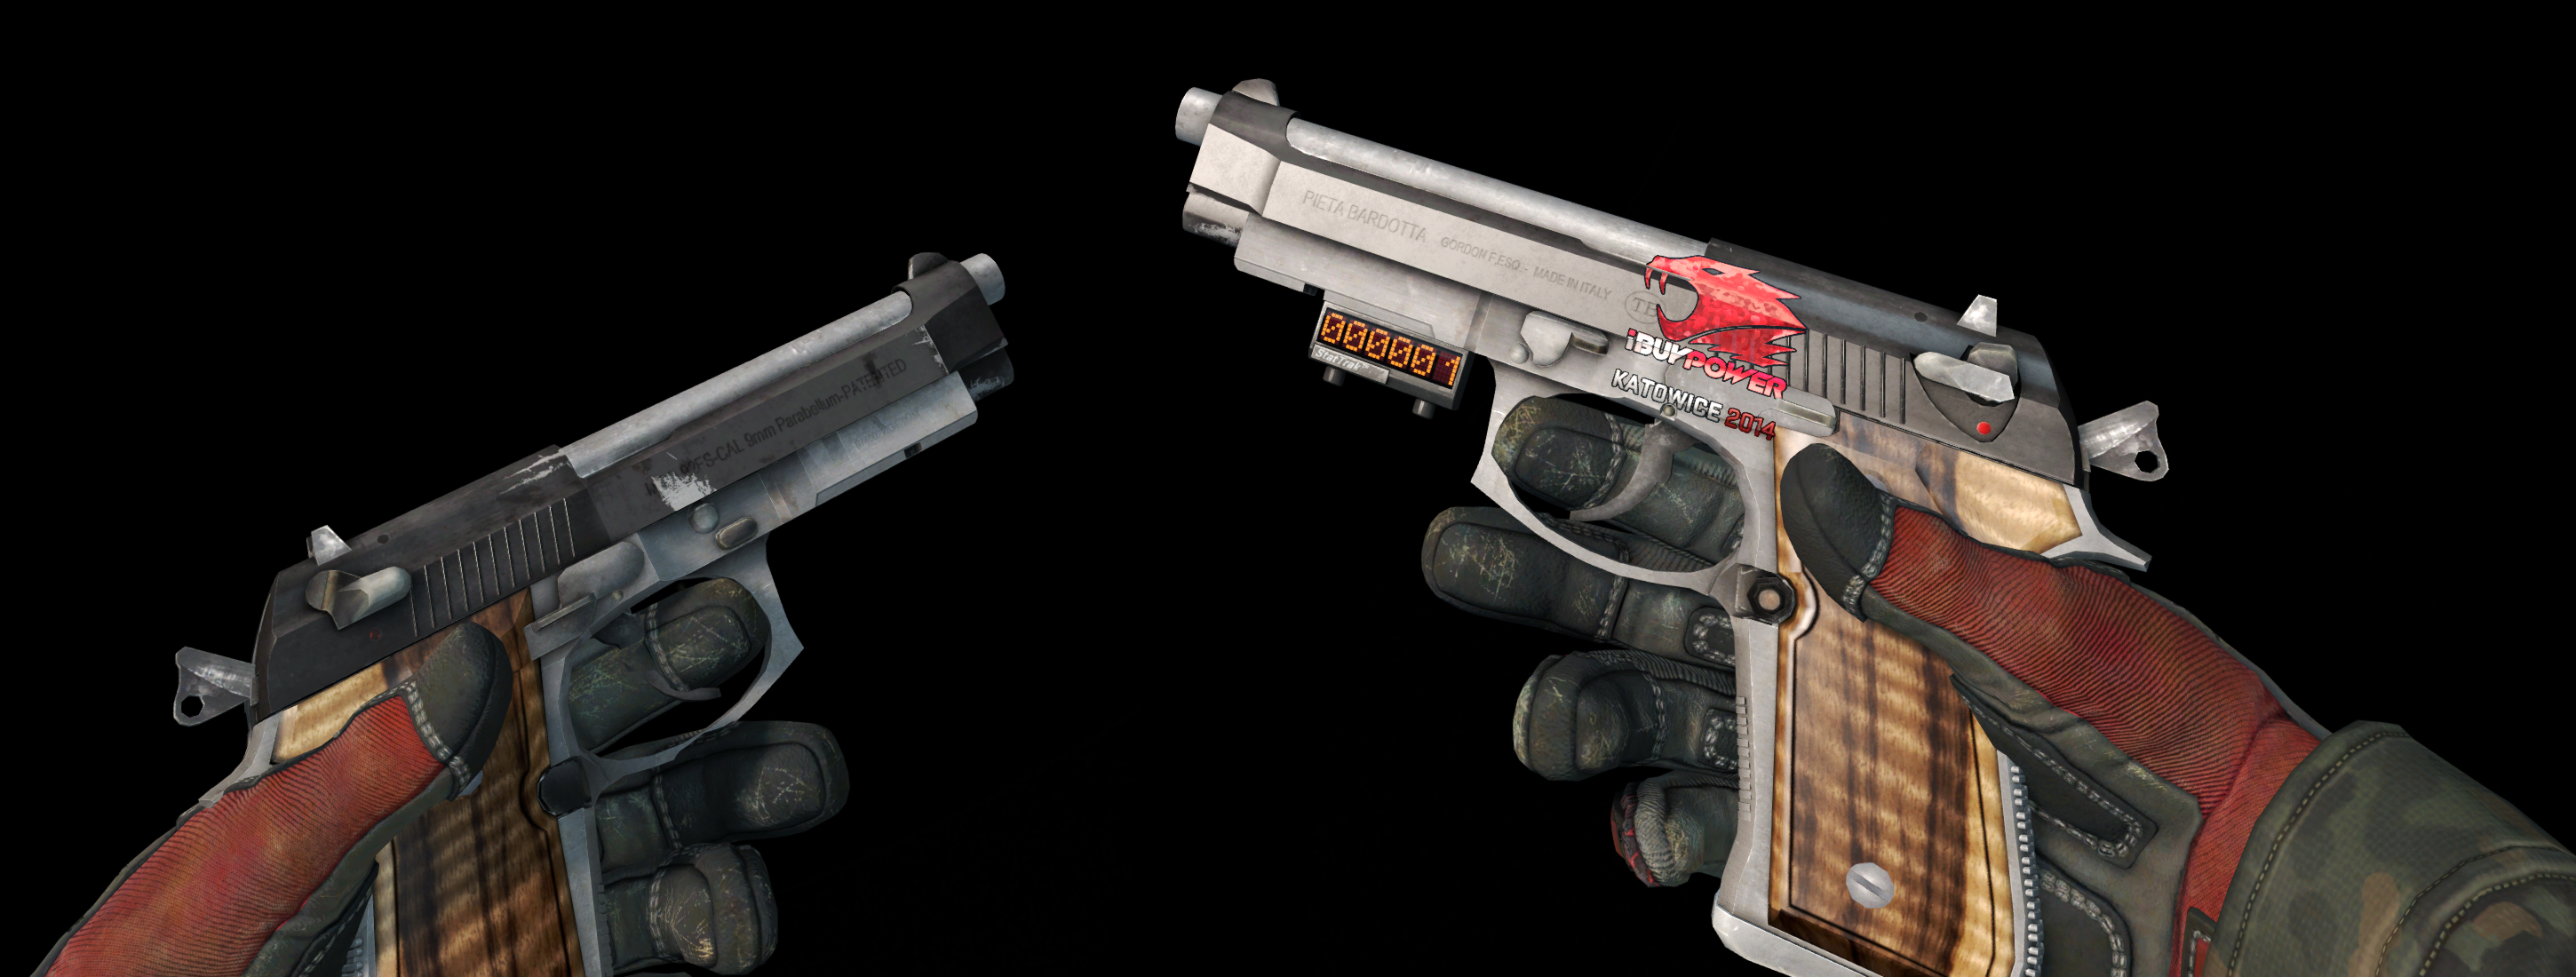 Steam Community :: Guide :: How To Find Skins With Katowice 2014